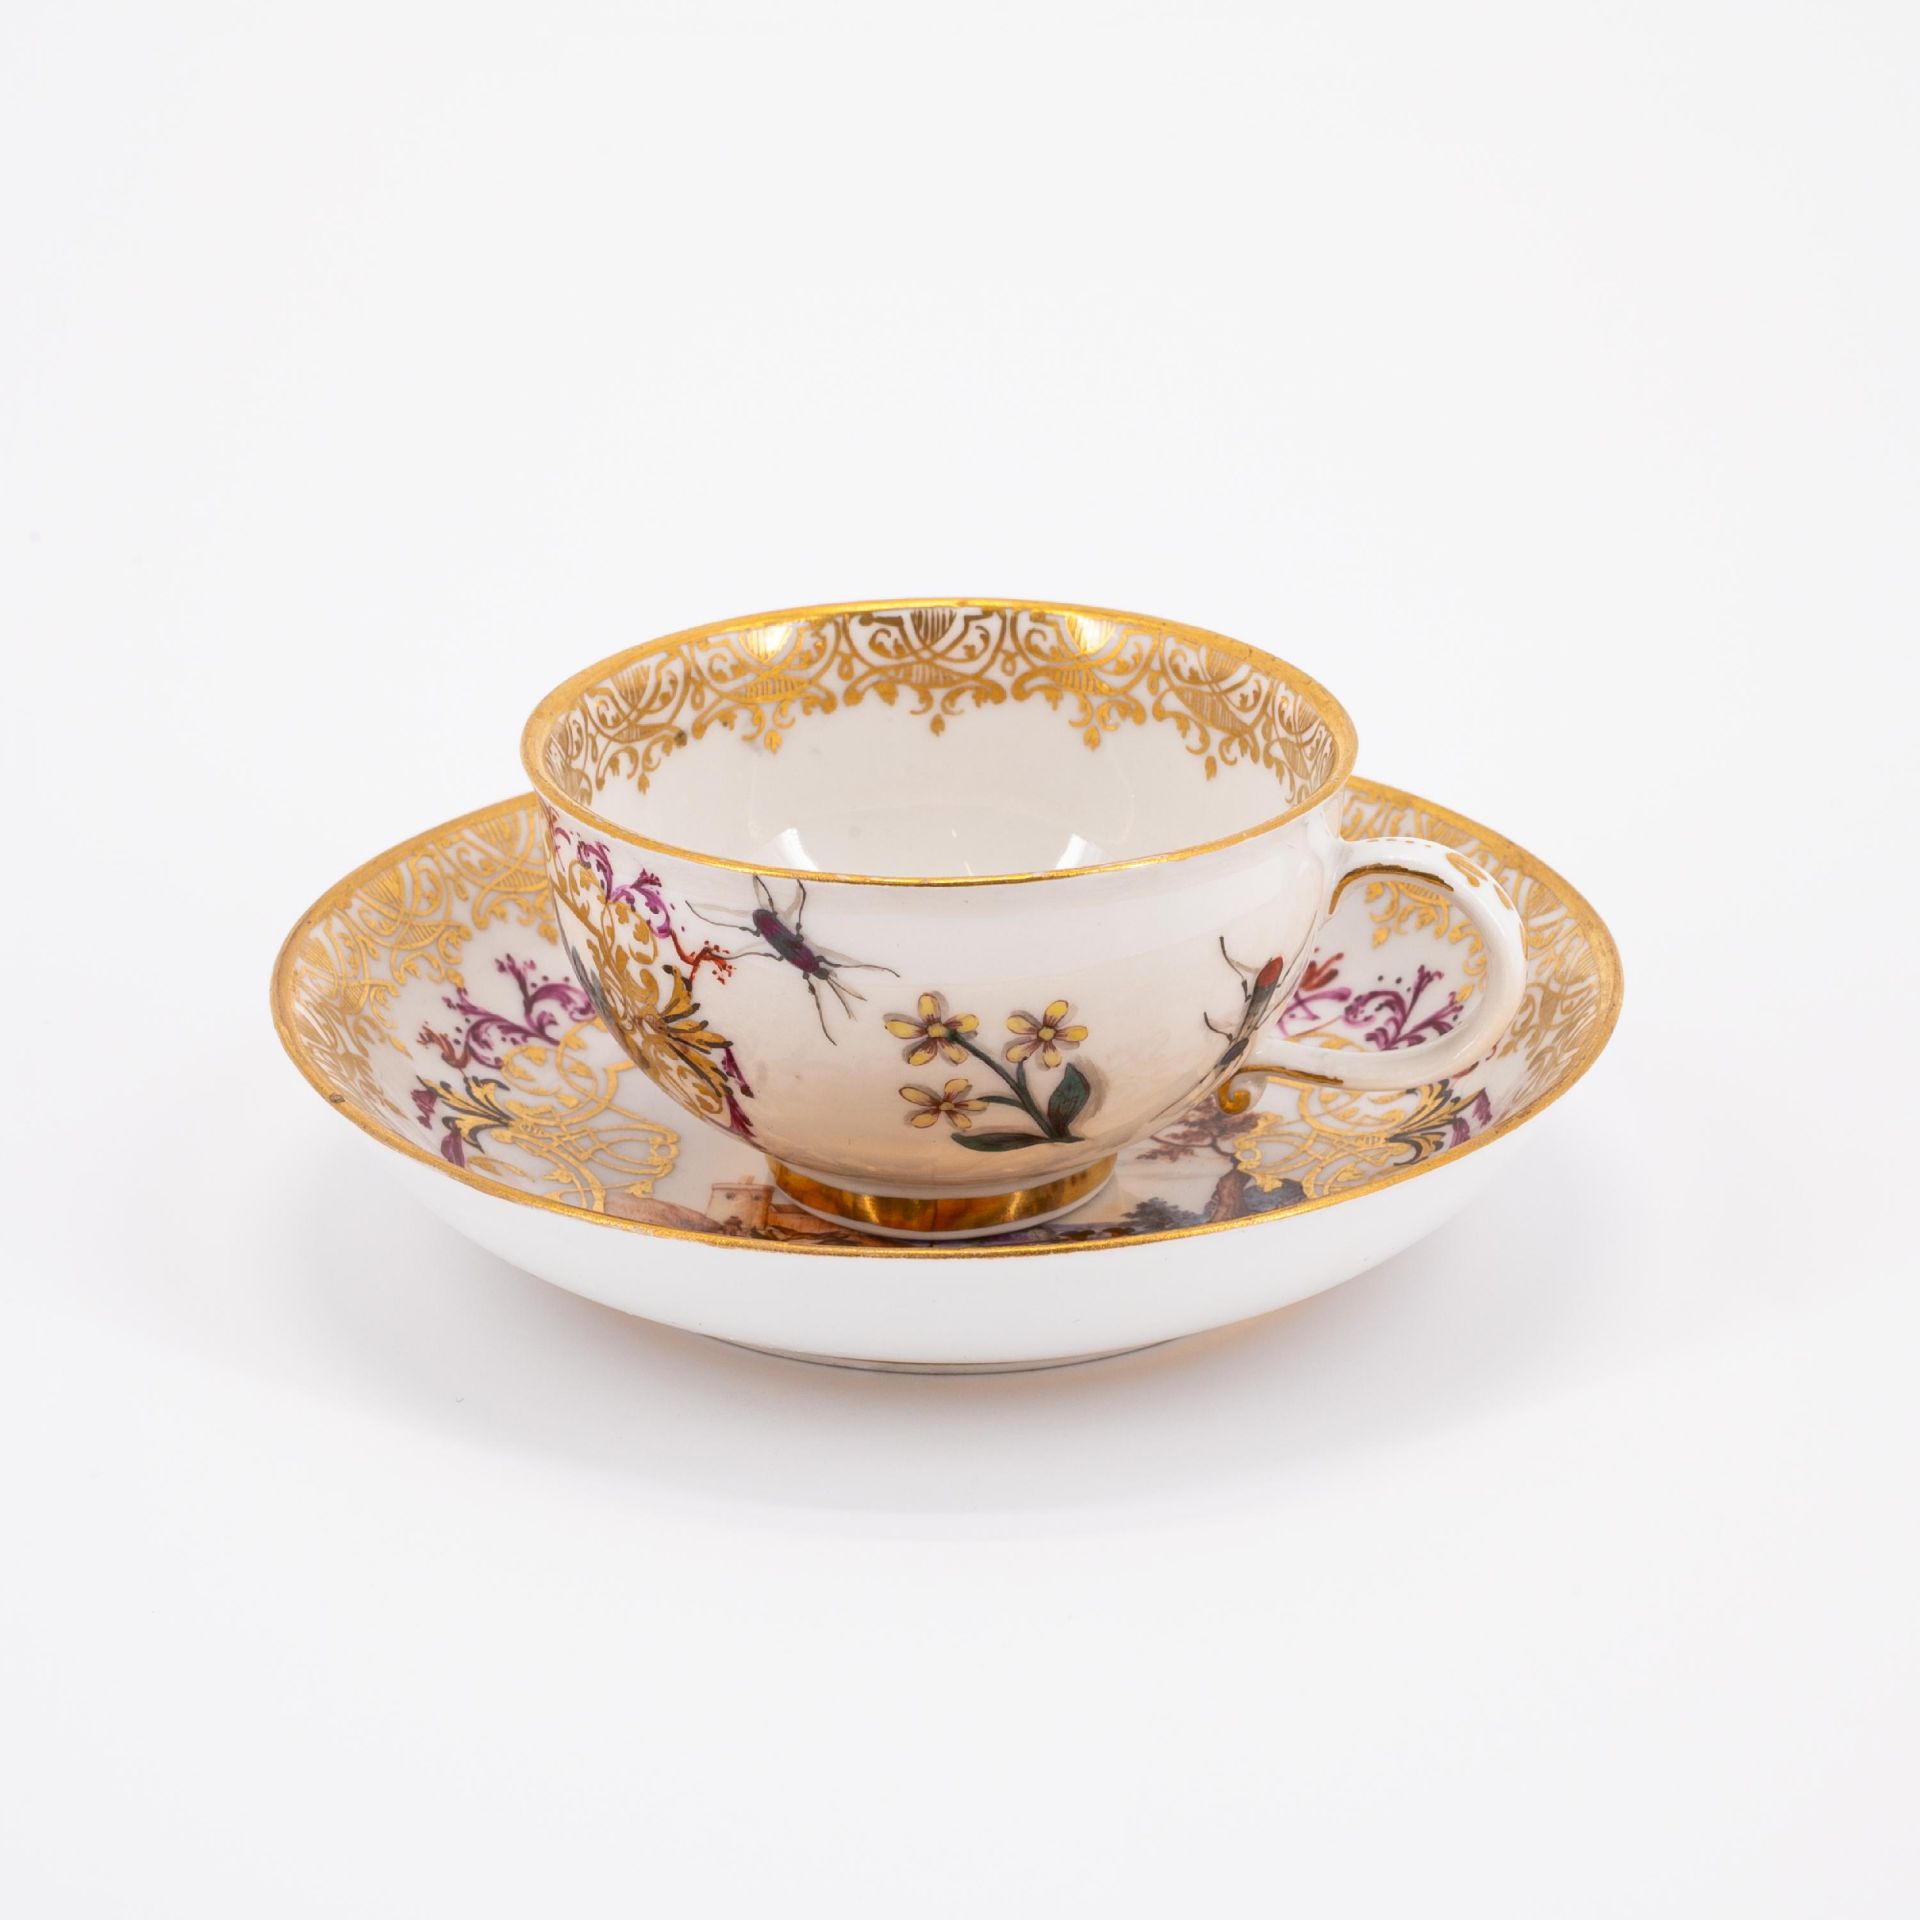 Meissen: CUP AND SAUCER WITH LARGE GOLD CARTOUCHES AND HUNTING SCENES - Image 2 of 6